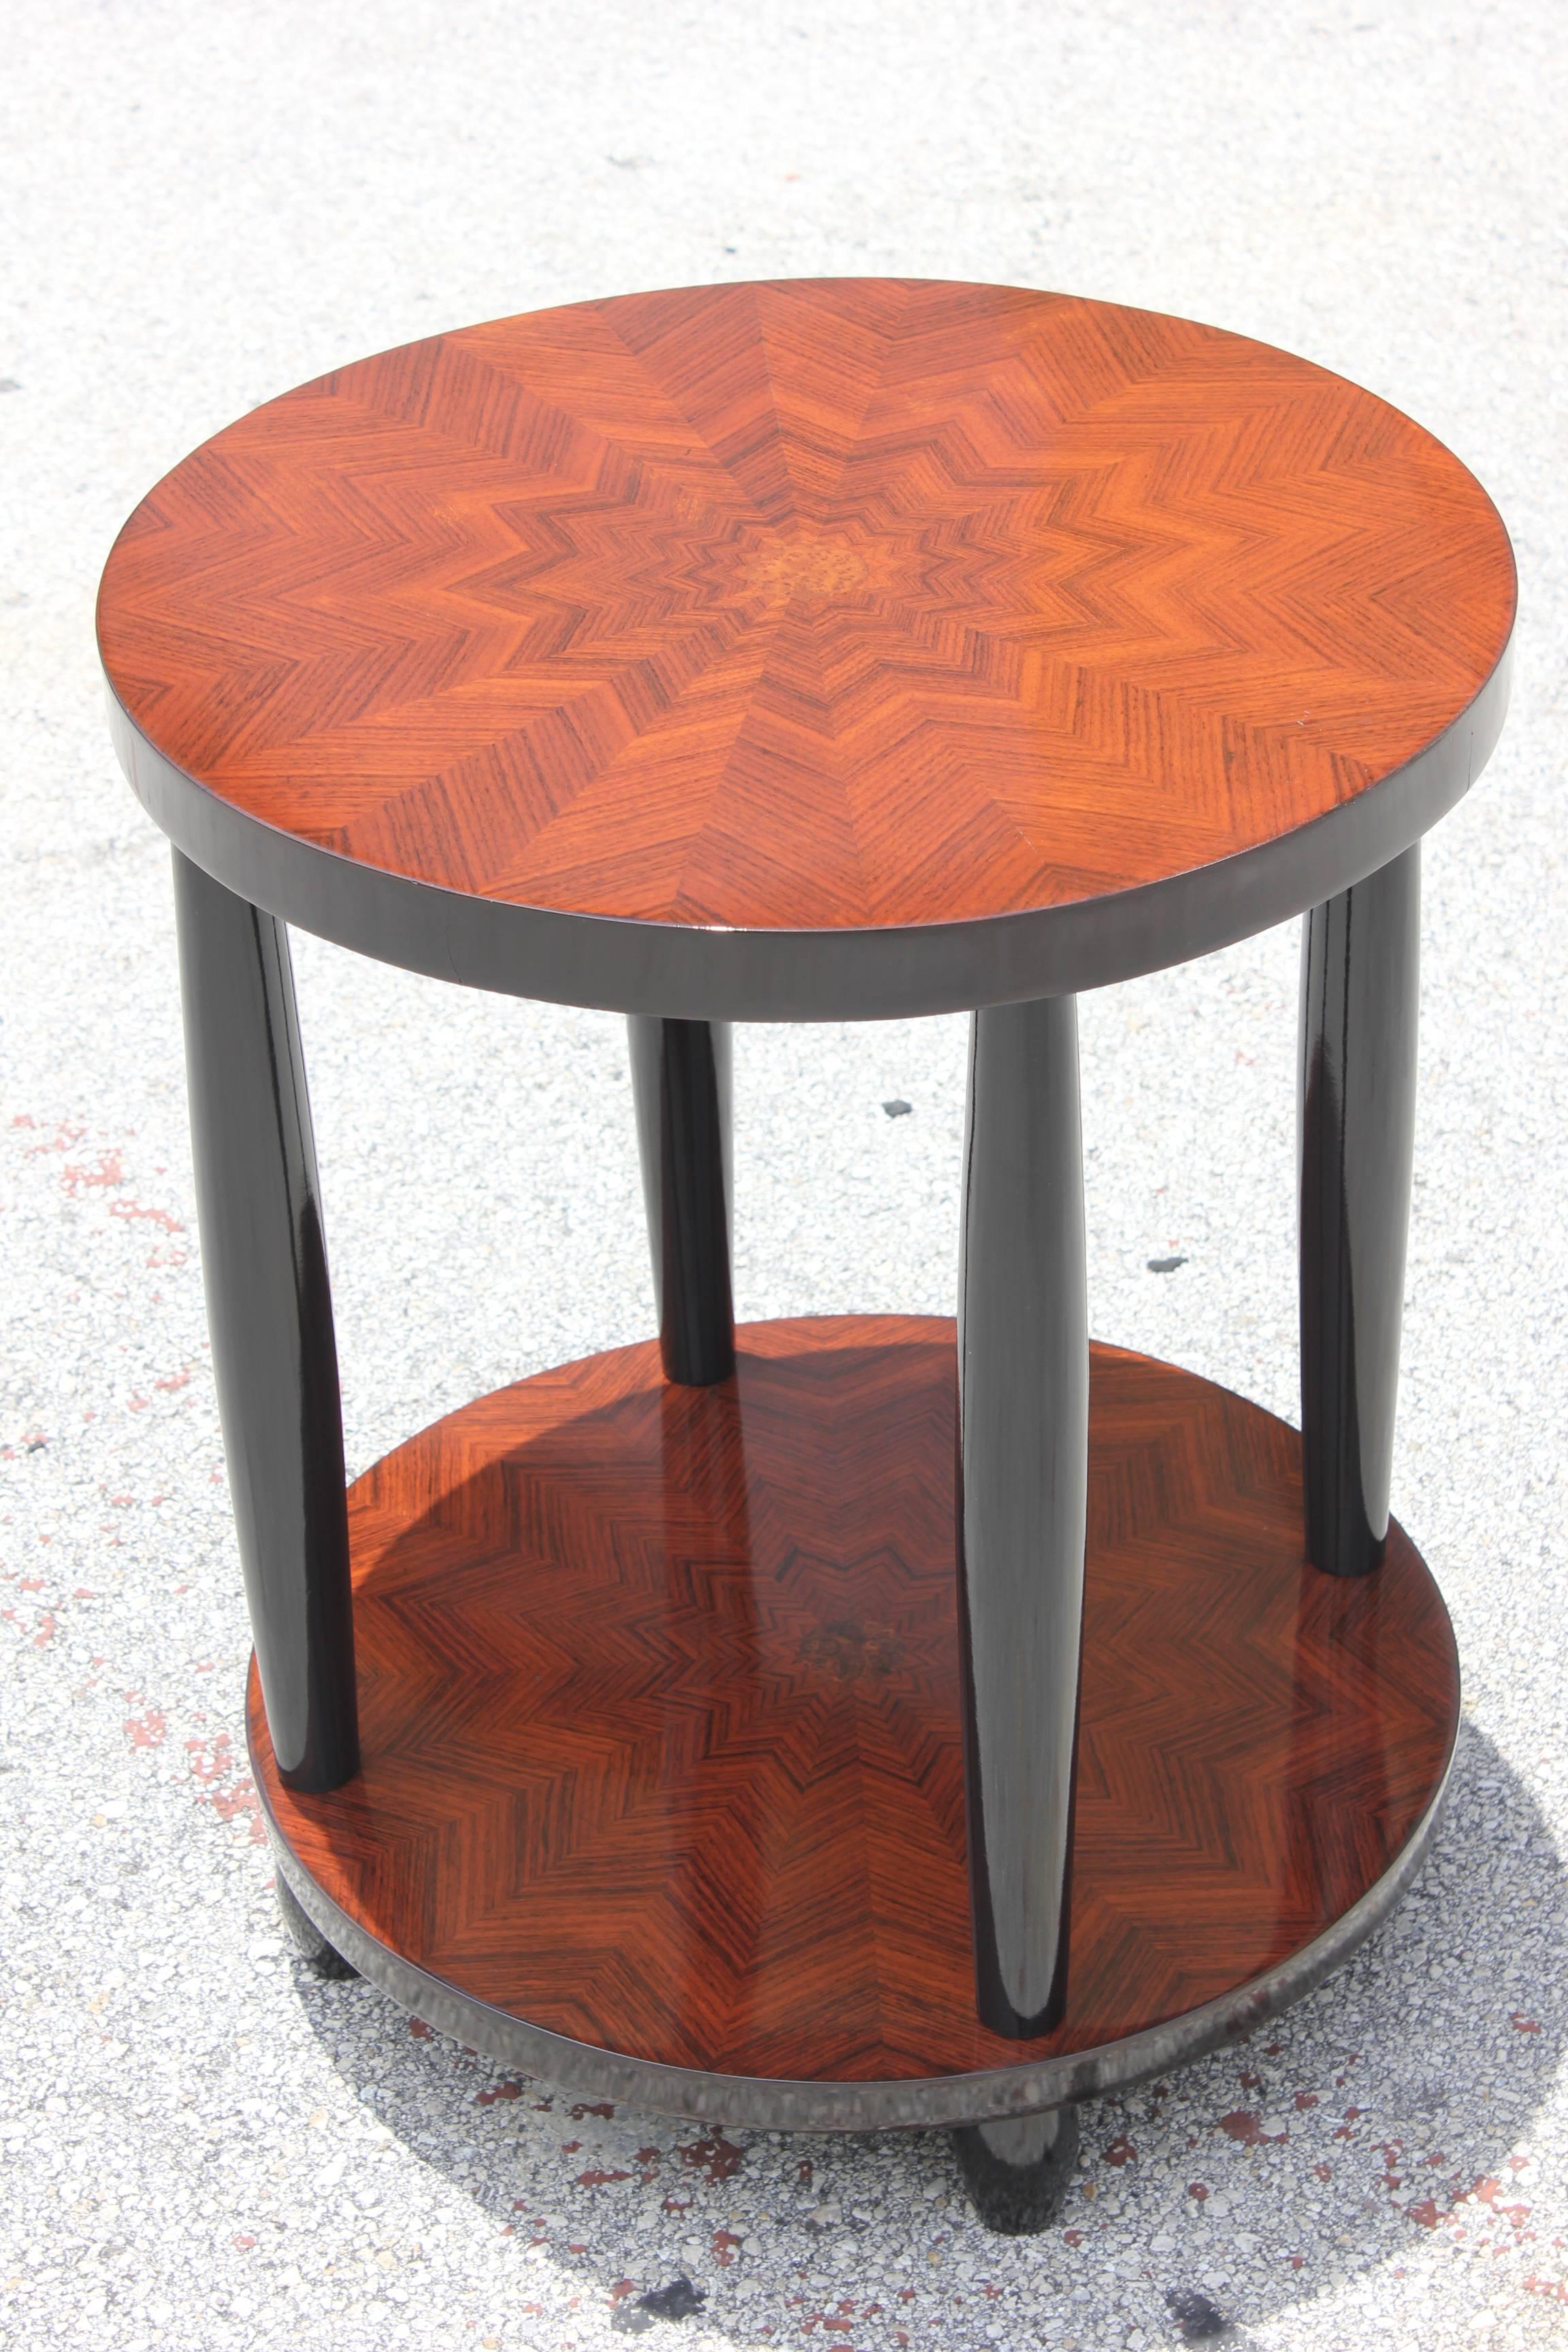 A beautiful French Art Deco two-tiered palisander inlaid starburst accent table, circa 1940s. Black lacquer supports. The inlay is a work of art.